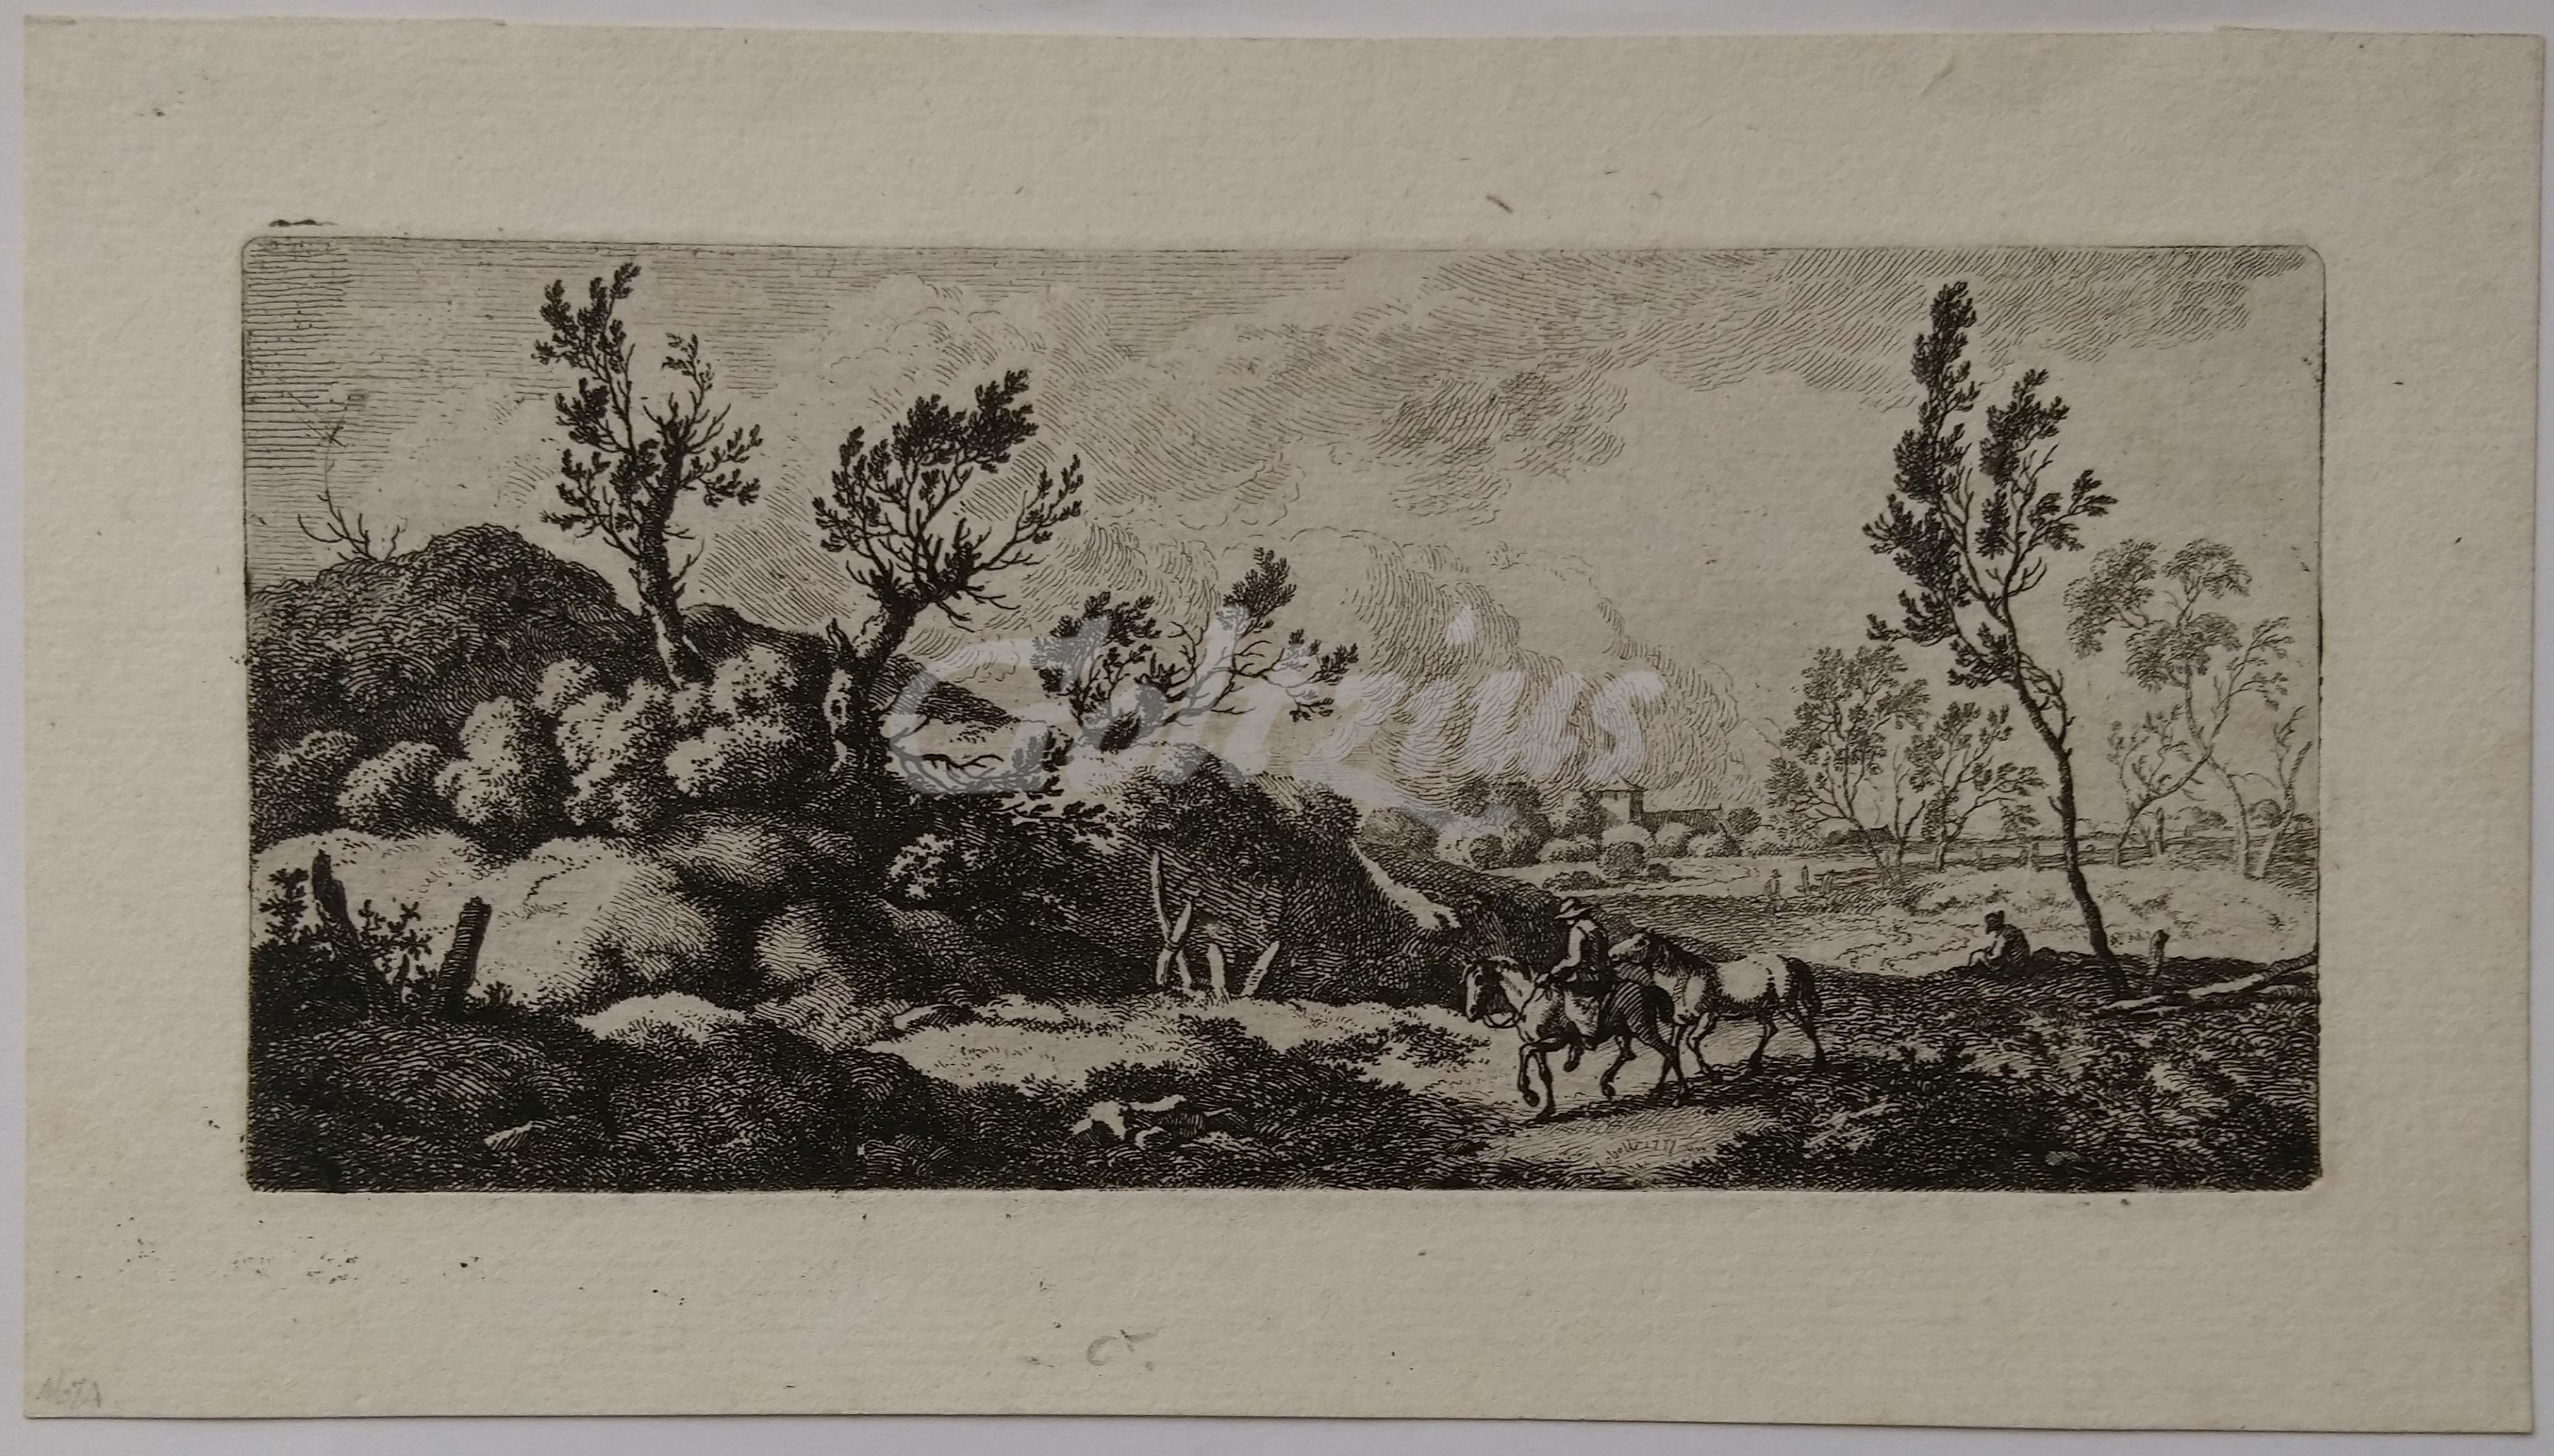 KOBELL, FERDINAND, Landscape with rider leading a horse